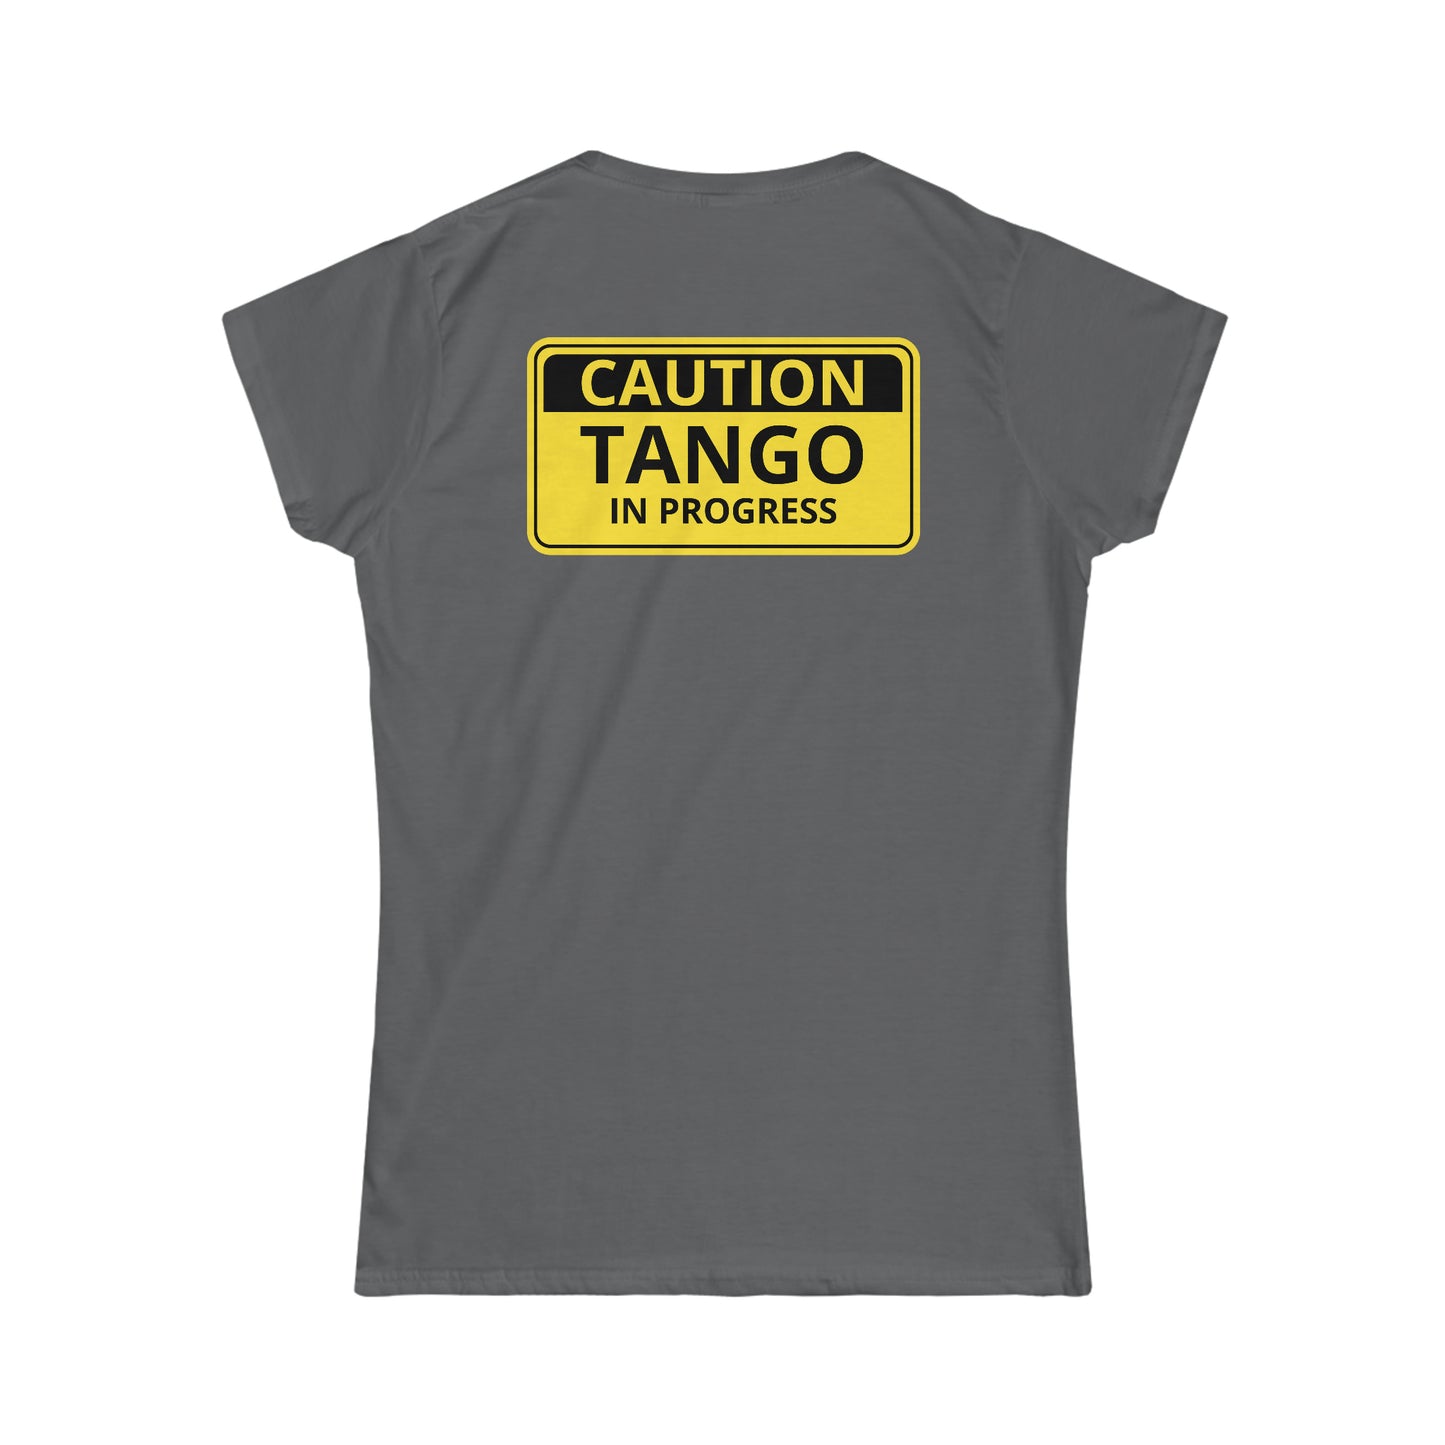 T-shirt with the text "Caution Tango in progress" written on a yellow warning sign